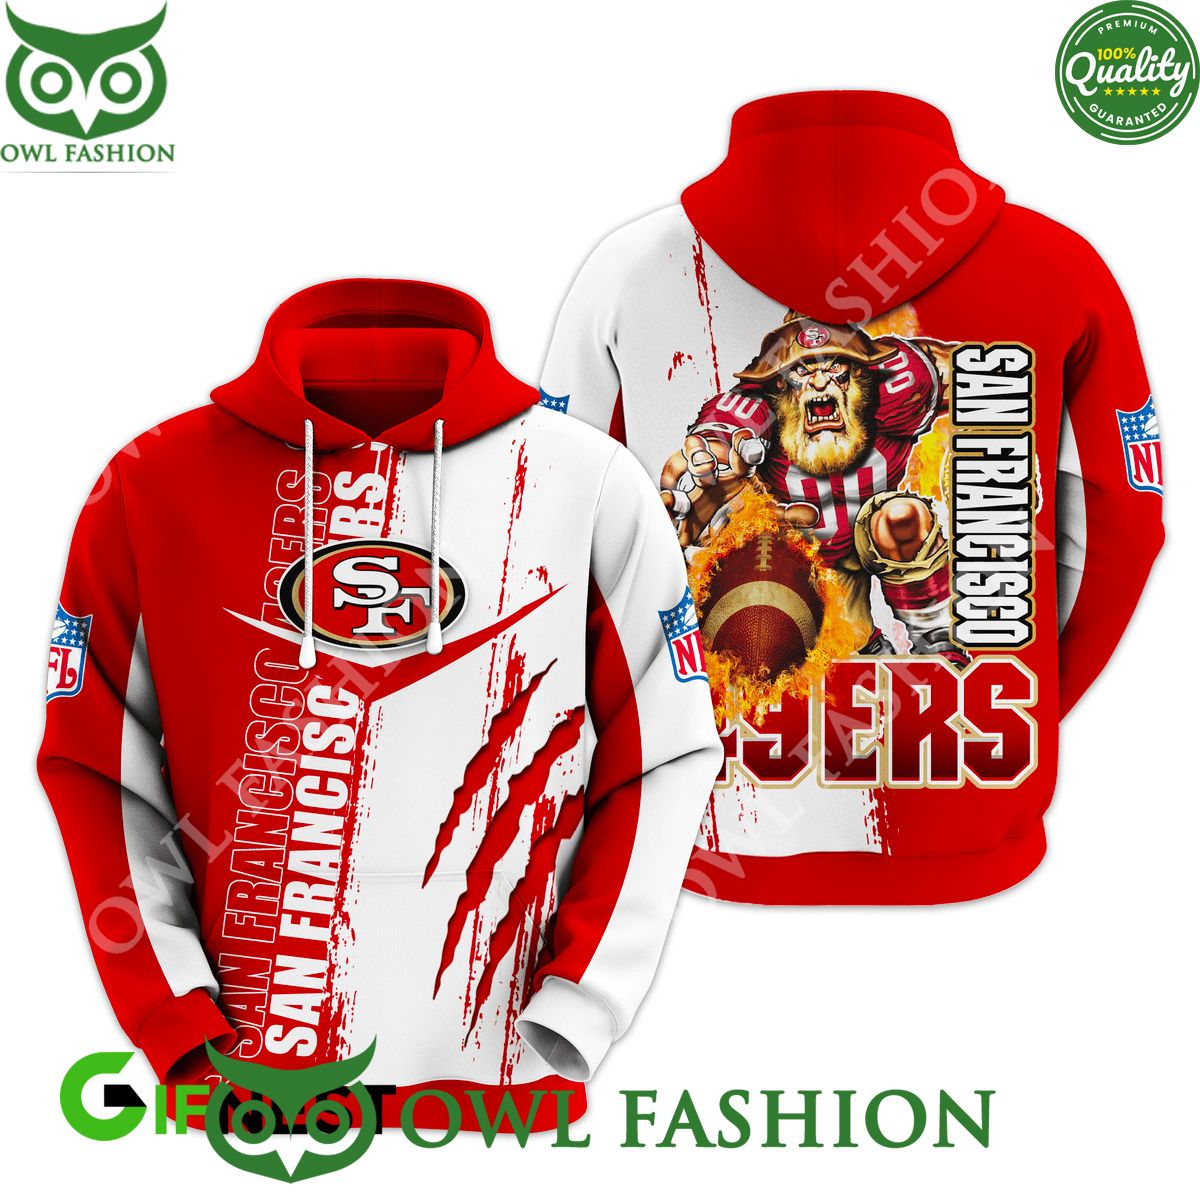 sf49 nfc west champions red scratches hoodie and leggings set 2 kaWb6.jpg